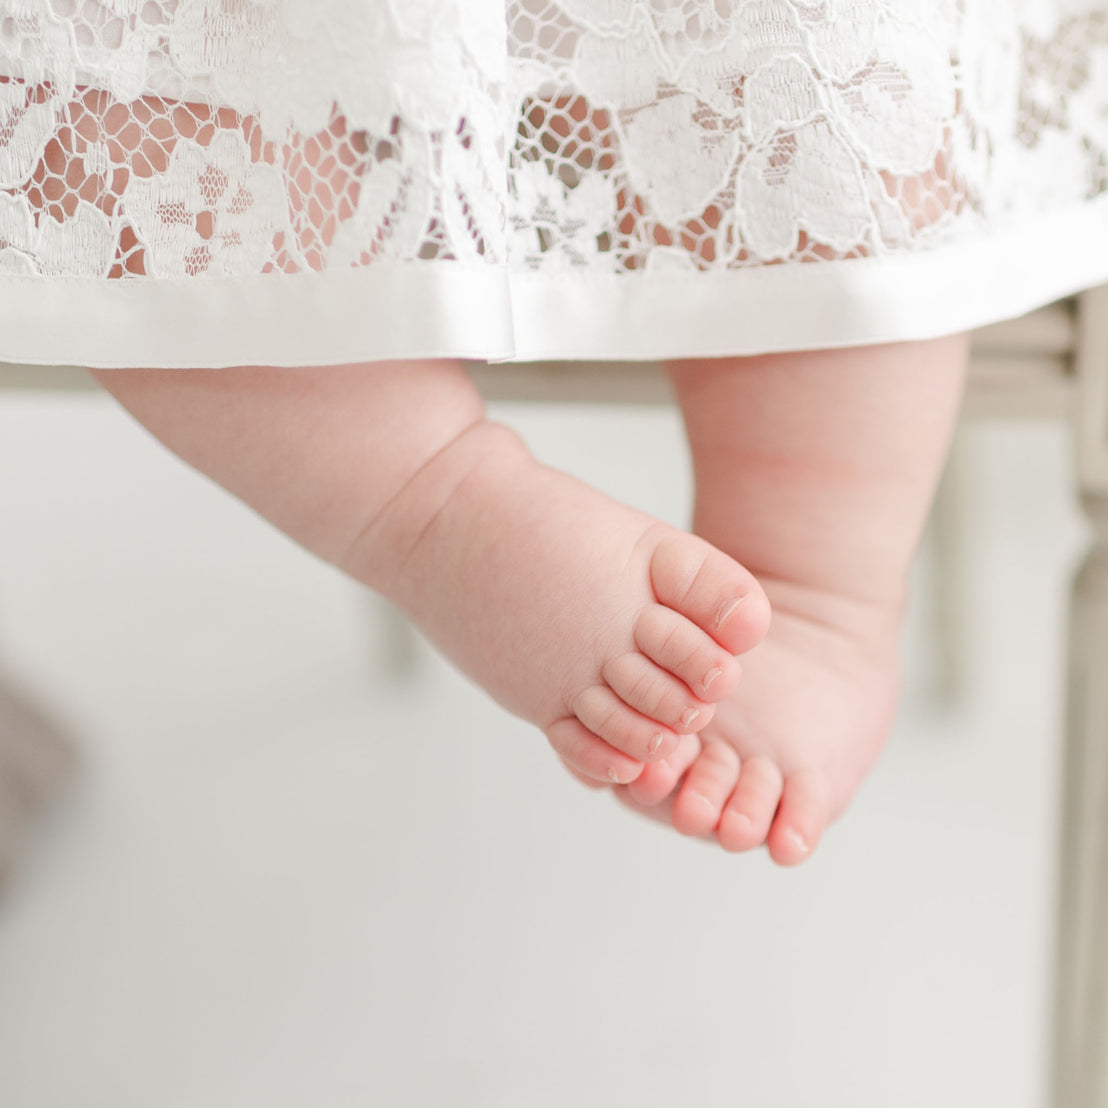 Close-up of a baby's bare feet dangling beneath a Rose Romper Dress skirt, with a blurred light background emphasizing the delicate texture and softness of the scene.